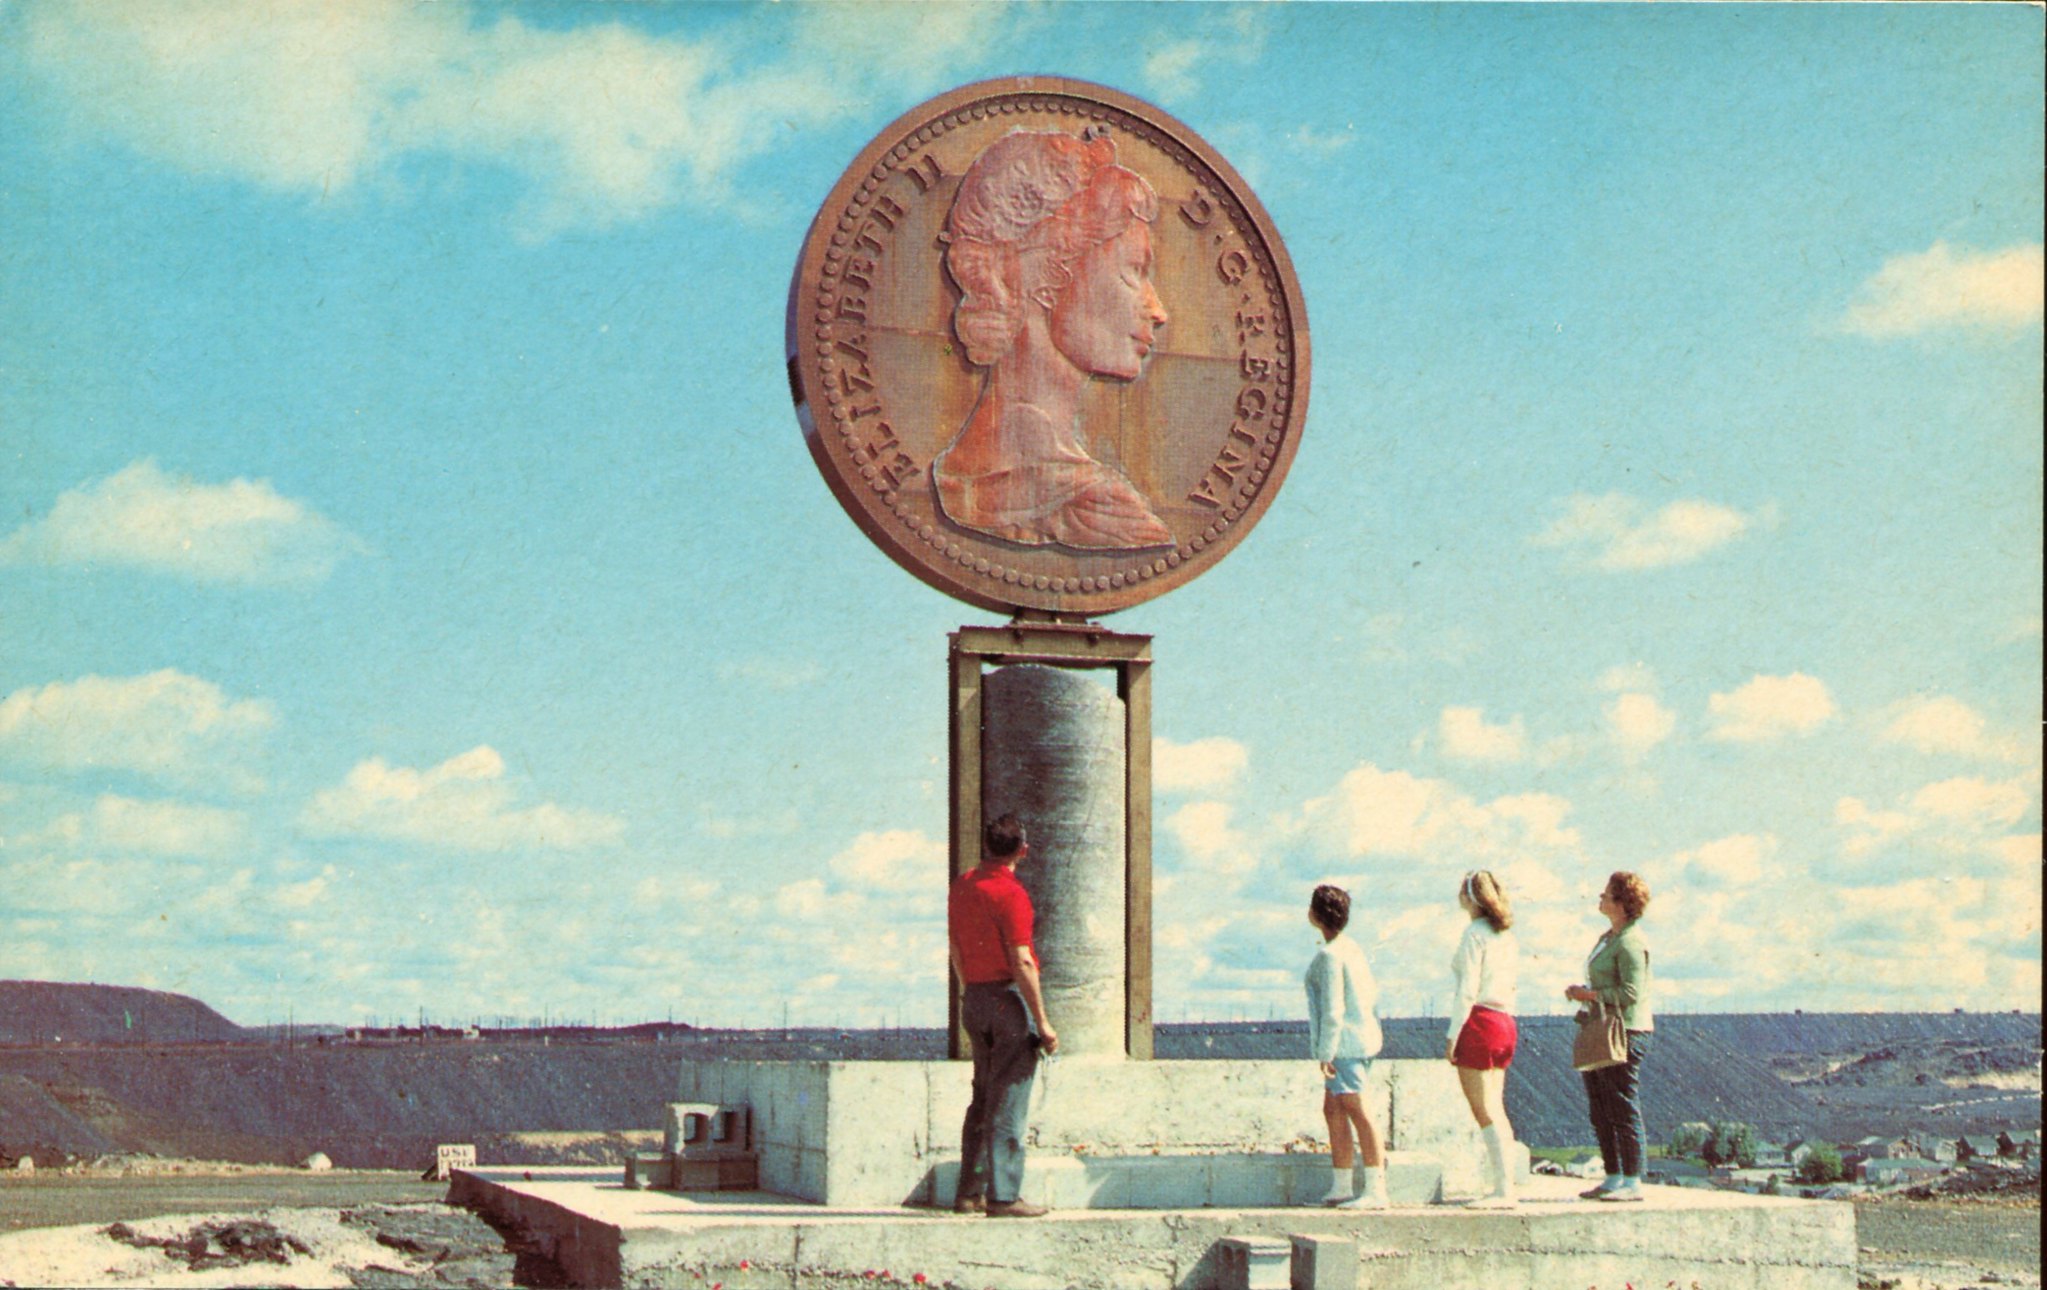 an aged photograph of 4 tourists looking up at the Penny monument, formerly in Sudbury; a giant replica penny set on a pillar, in front of a blue sky.